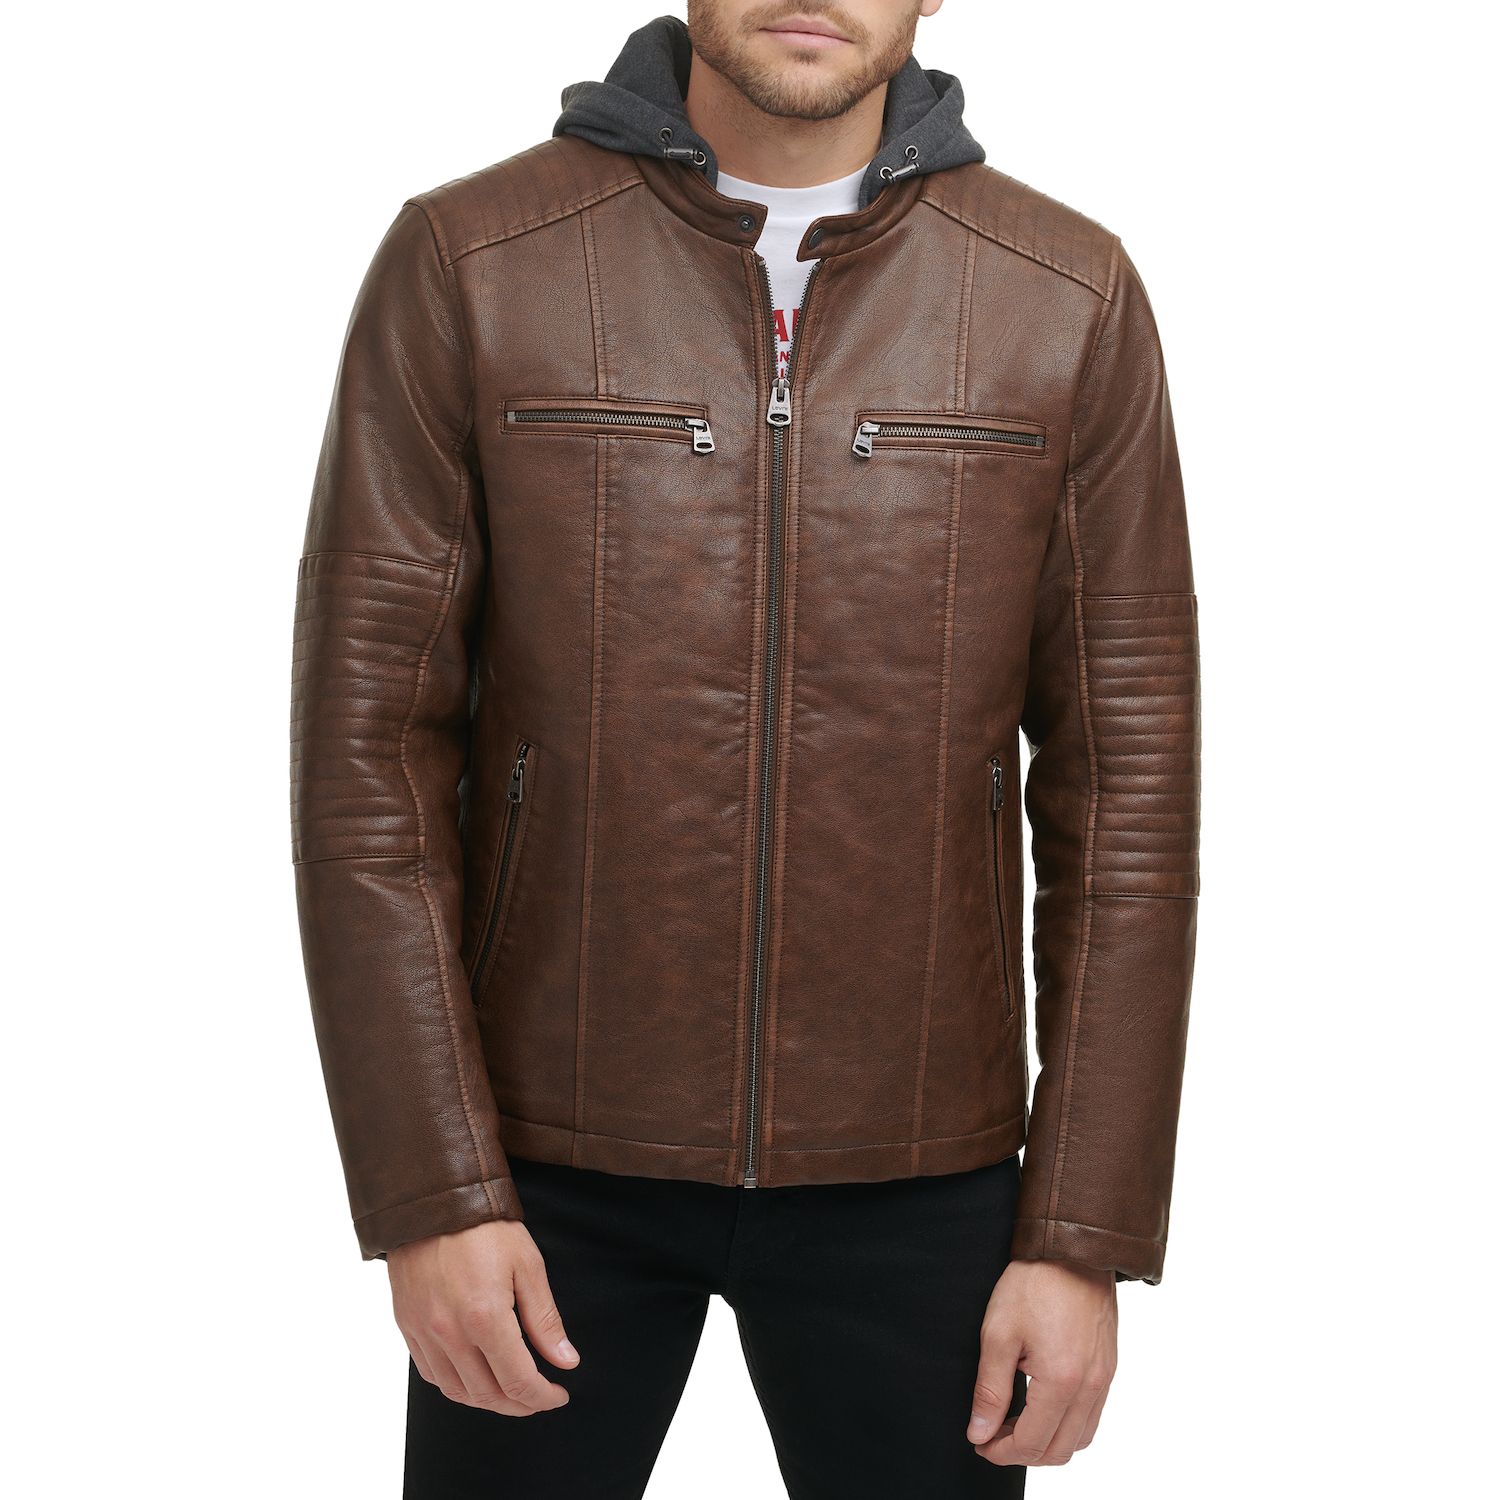 Image for Levi's Men's Faux-Leather Hooded Racer Jacket at Kohl's.